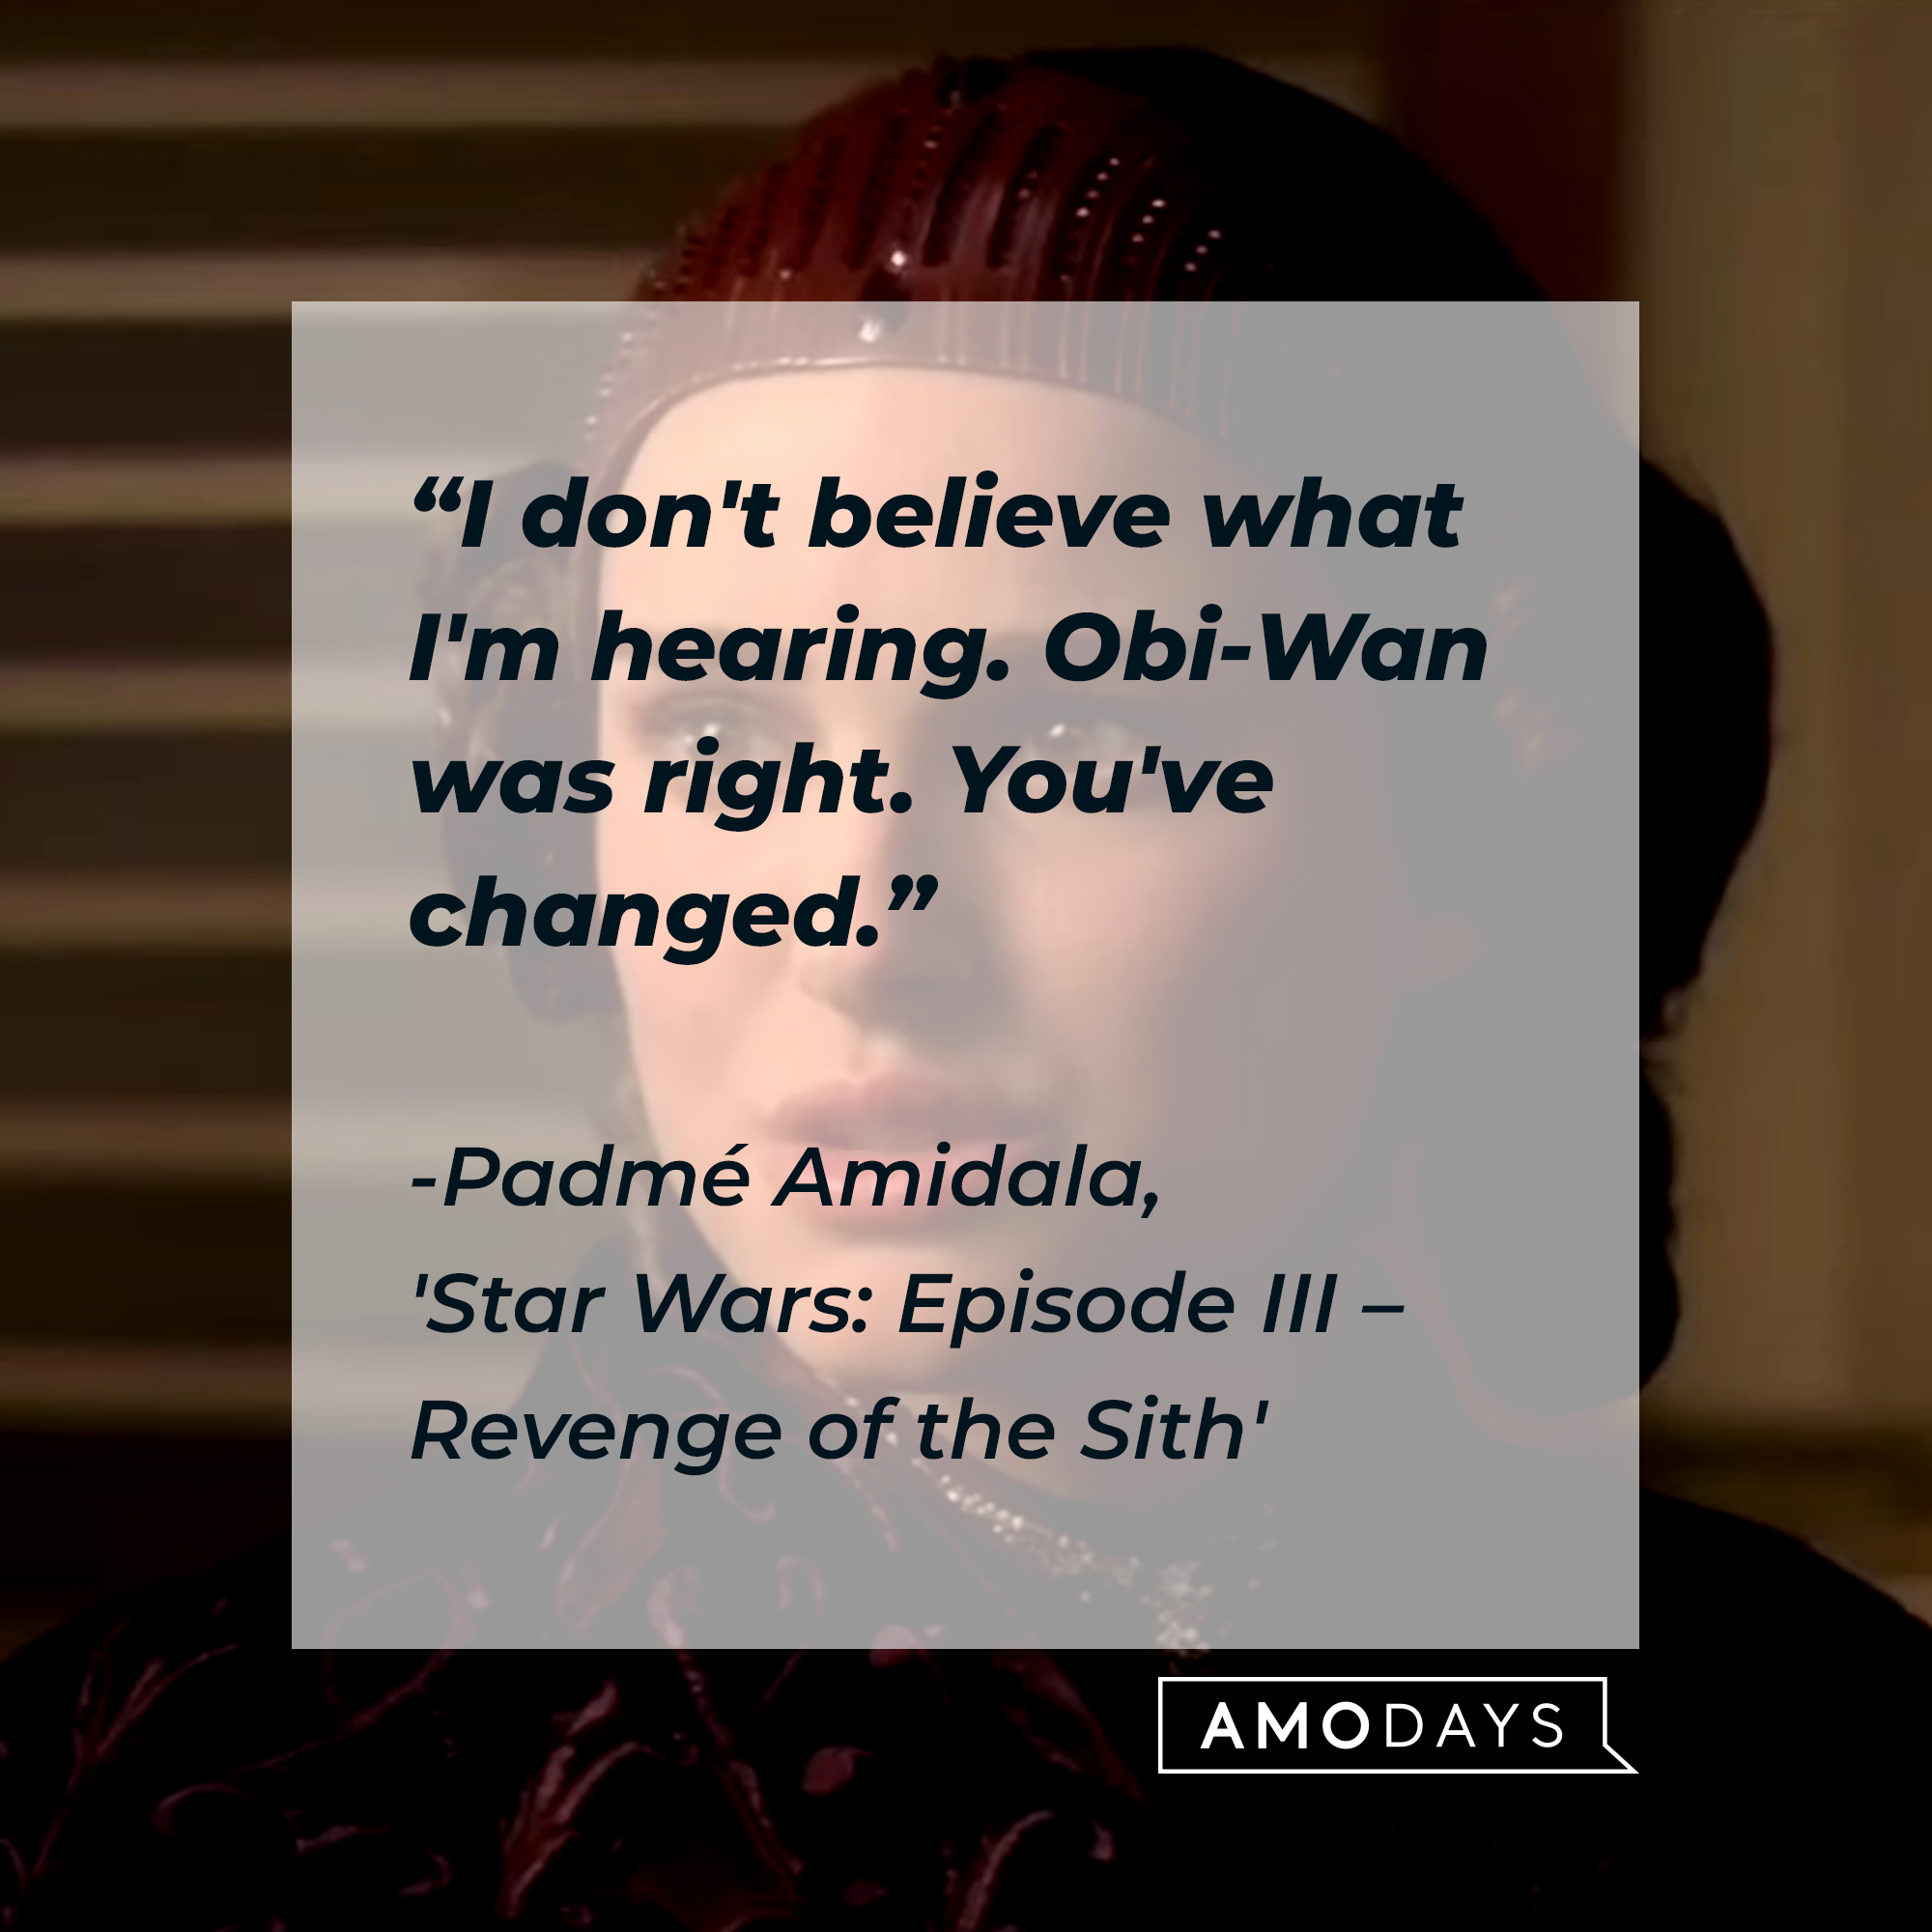 Padmé Amidala with her quote: "I don't believe what I'm hearing. Obi-Wan was right. You've changed." | Source: Facebook.com/StarWars